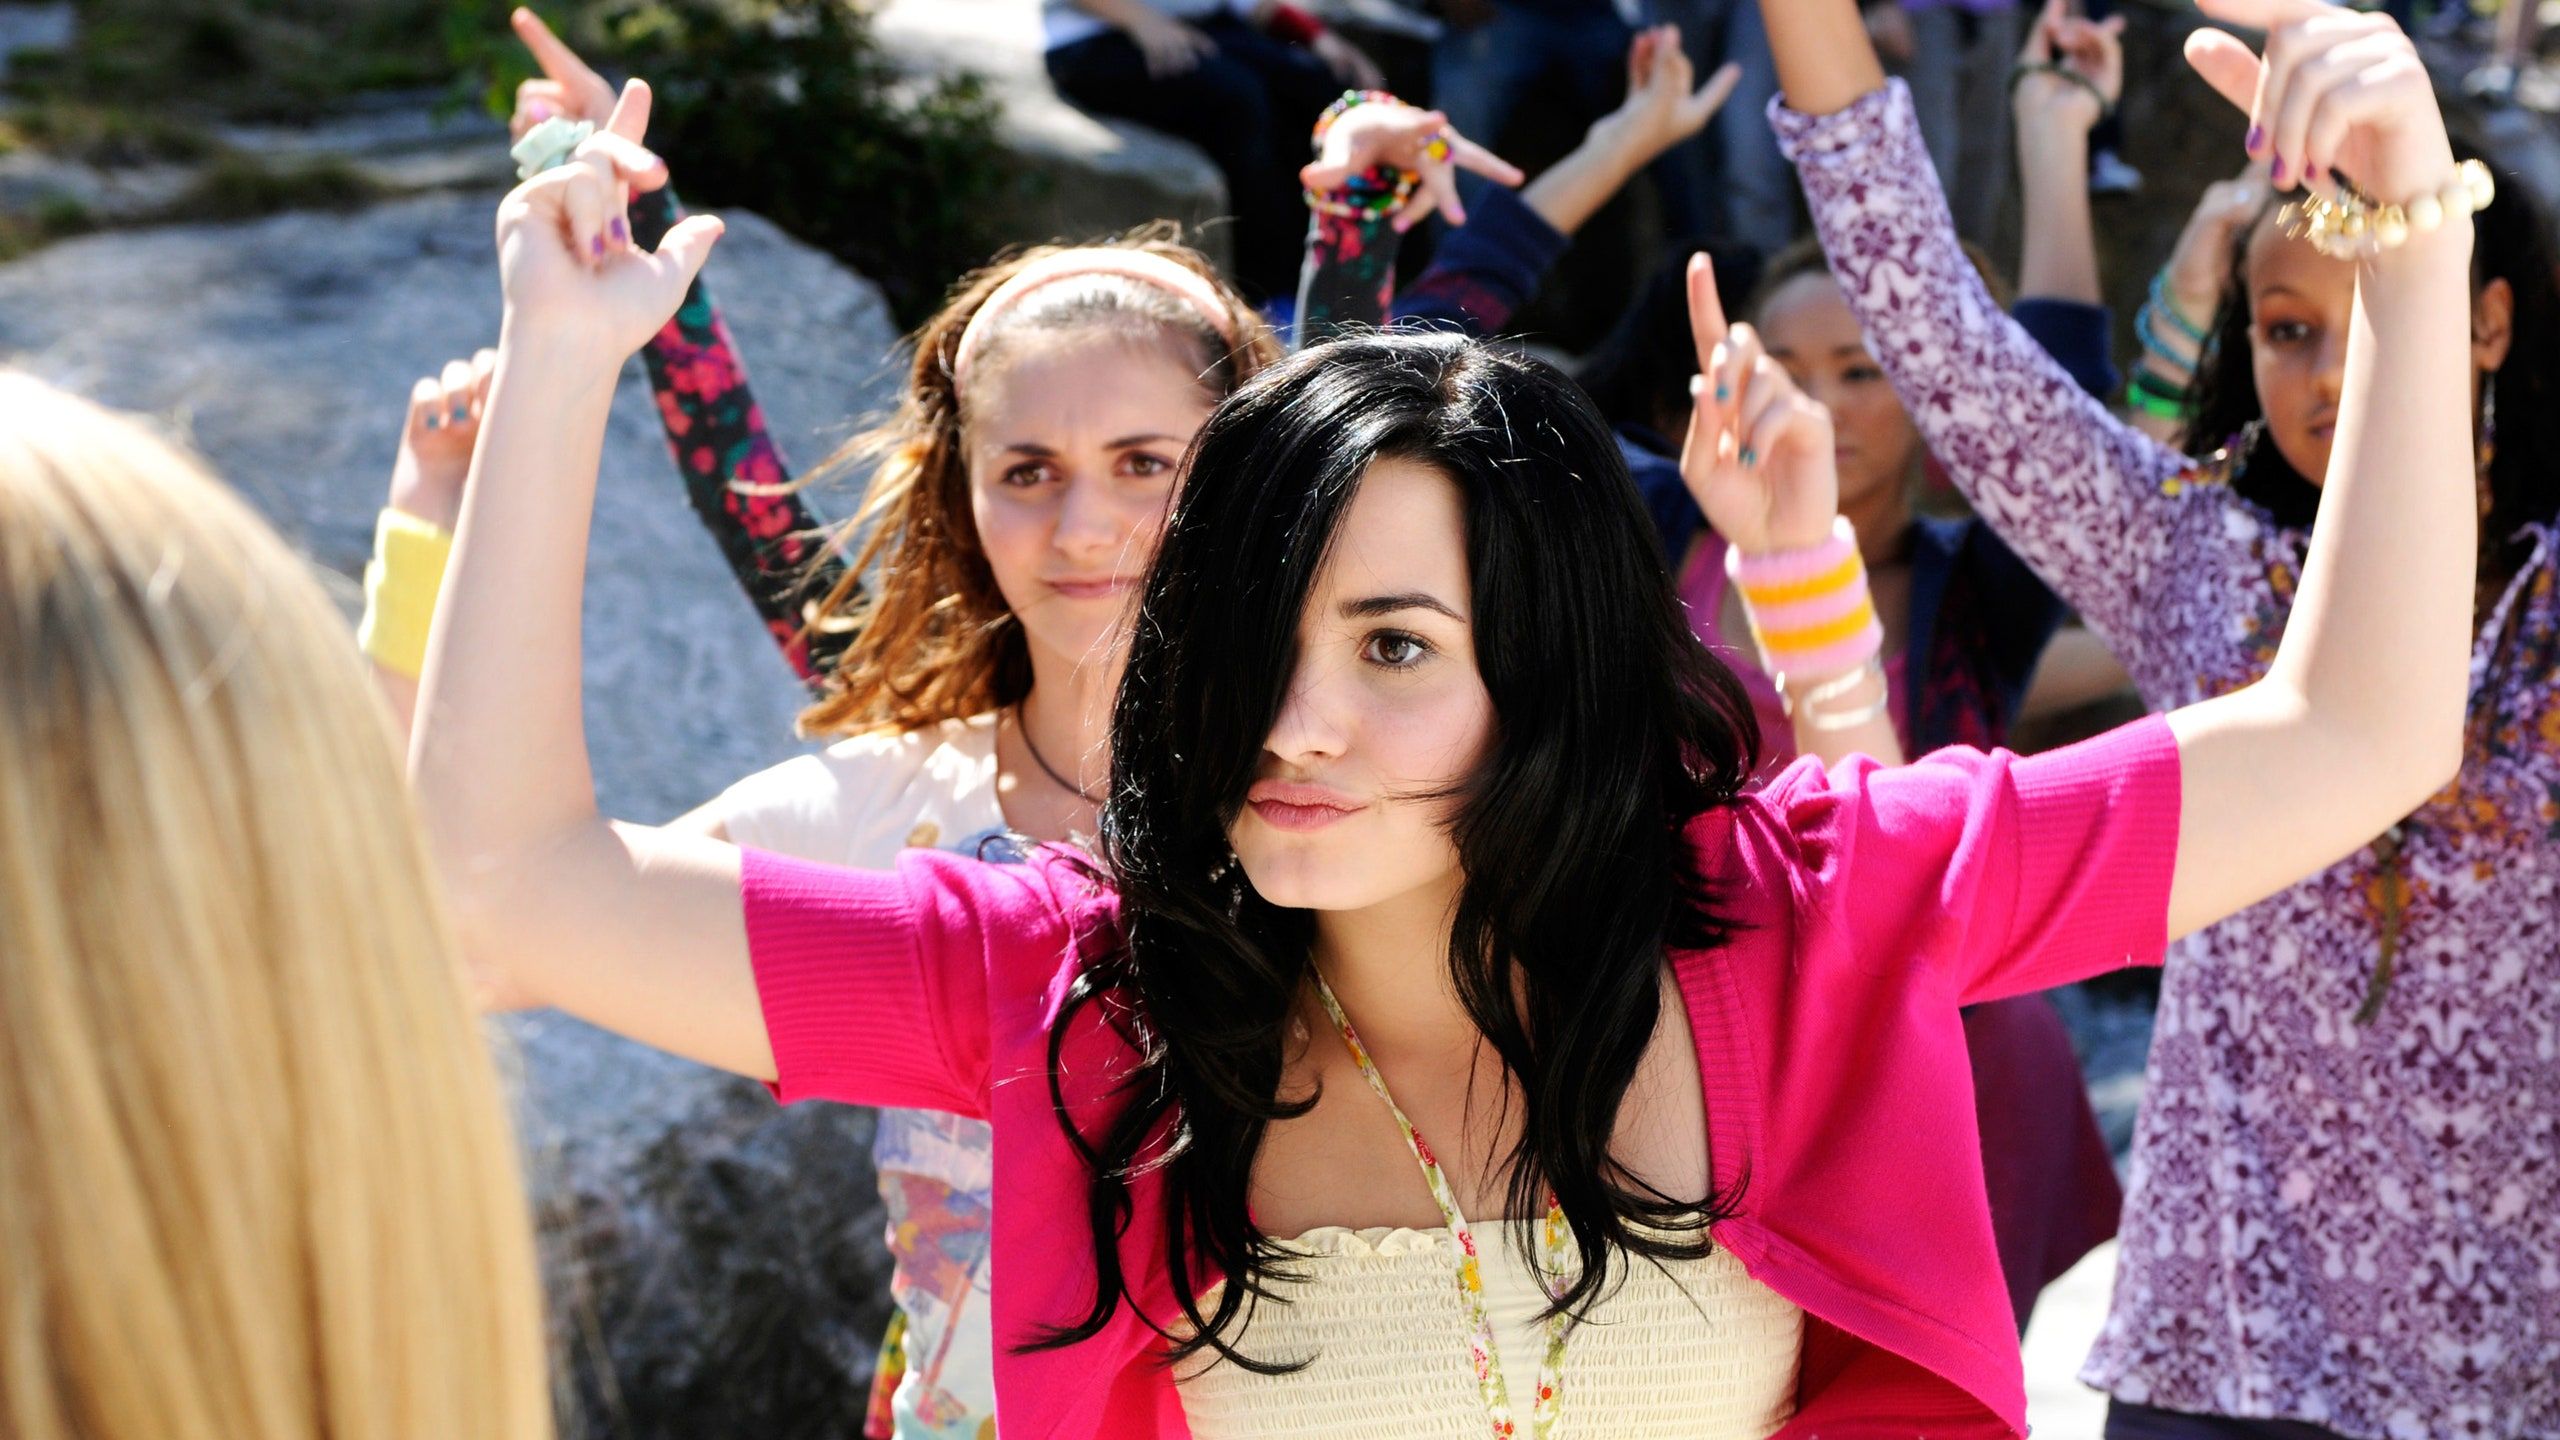 Demi Lovato Just Rewatched The Two Camp Rock Movies With Her Boyfriend Max Ehrich